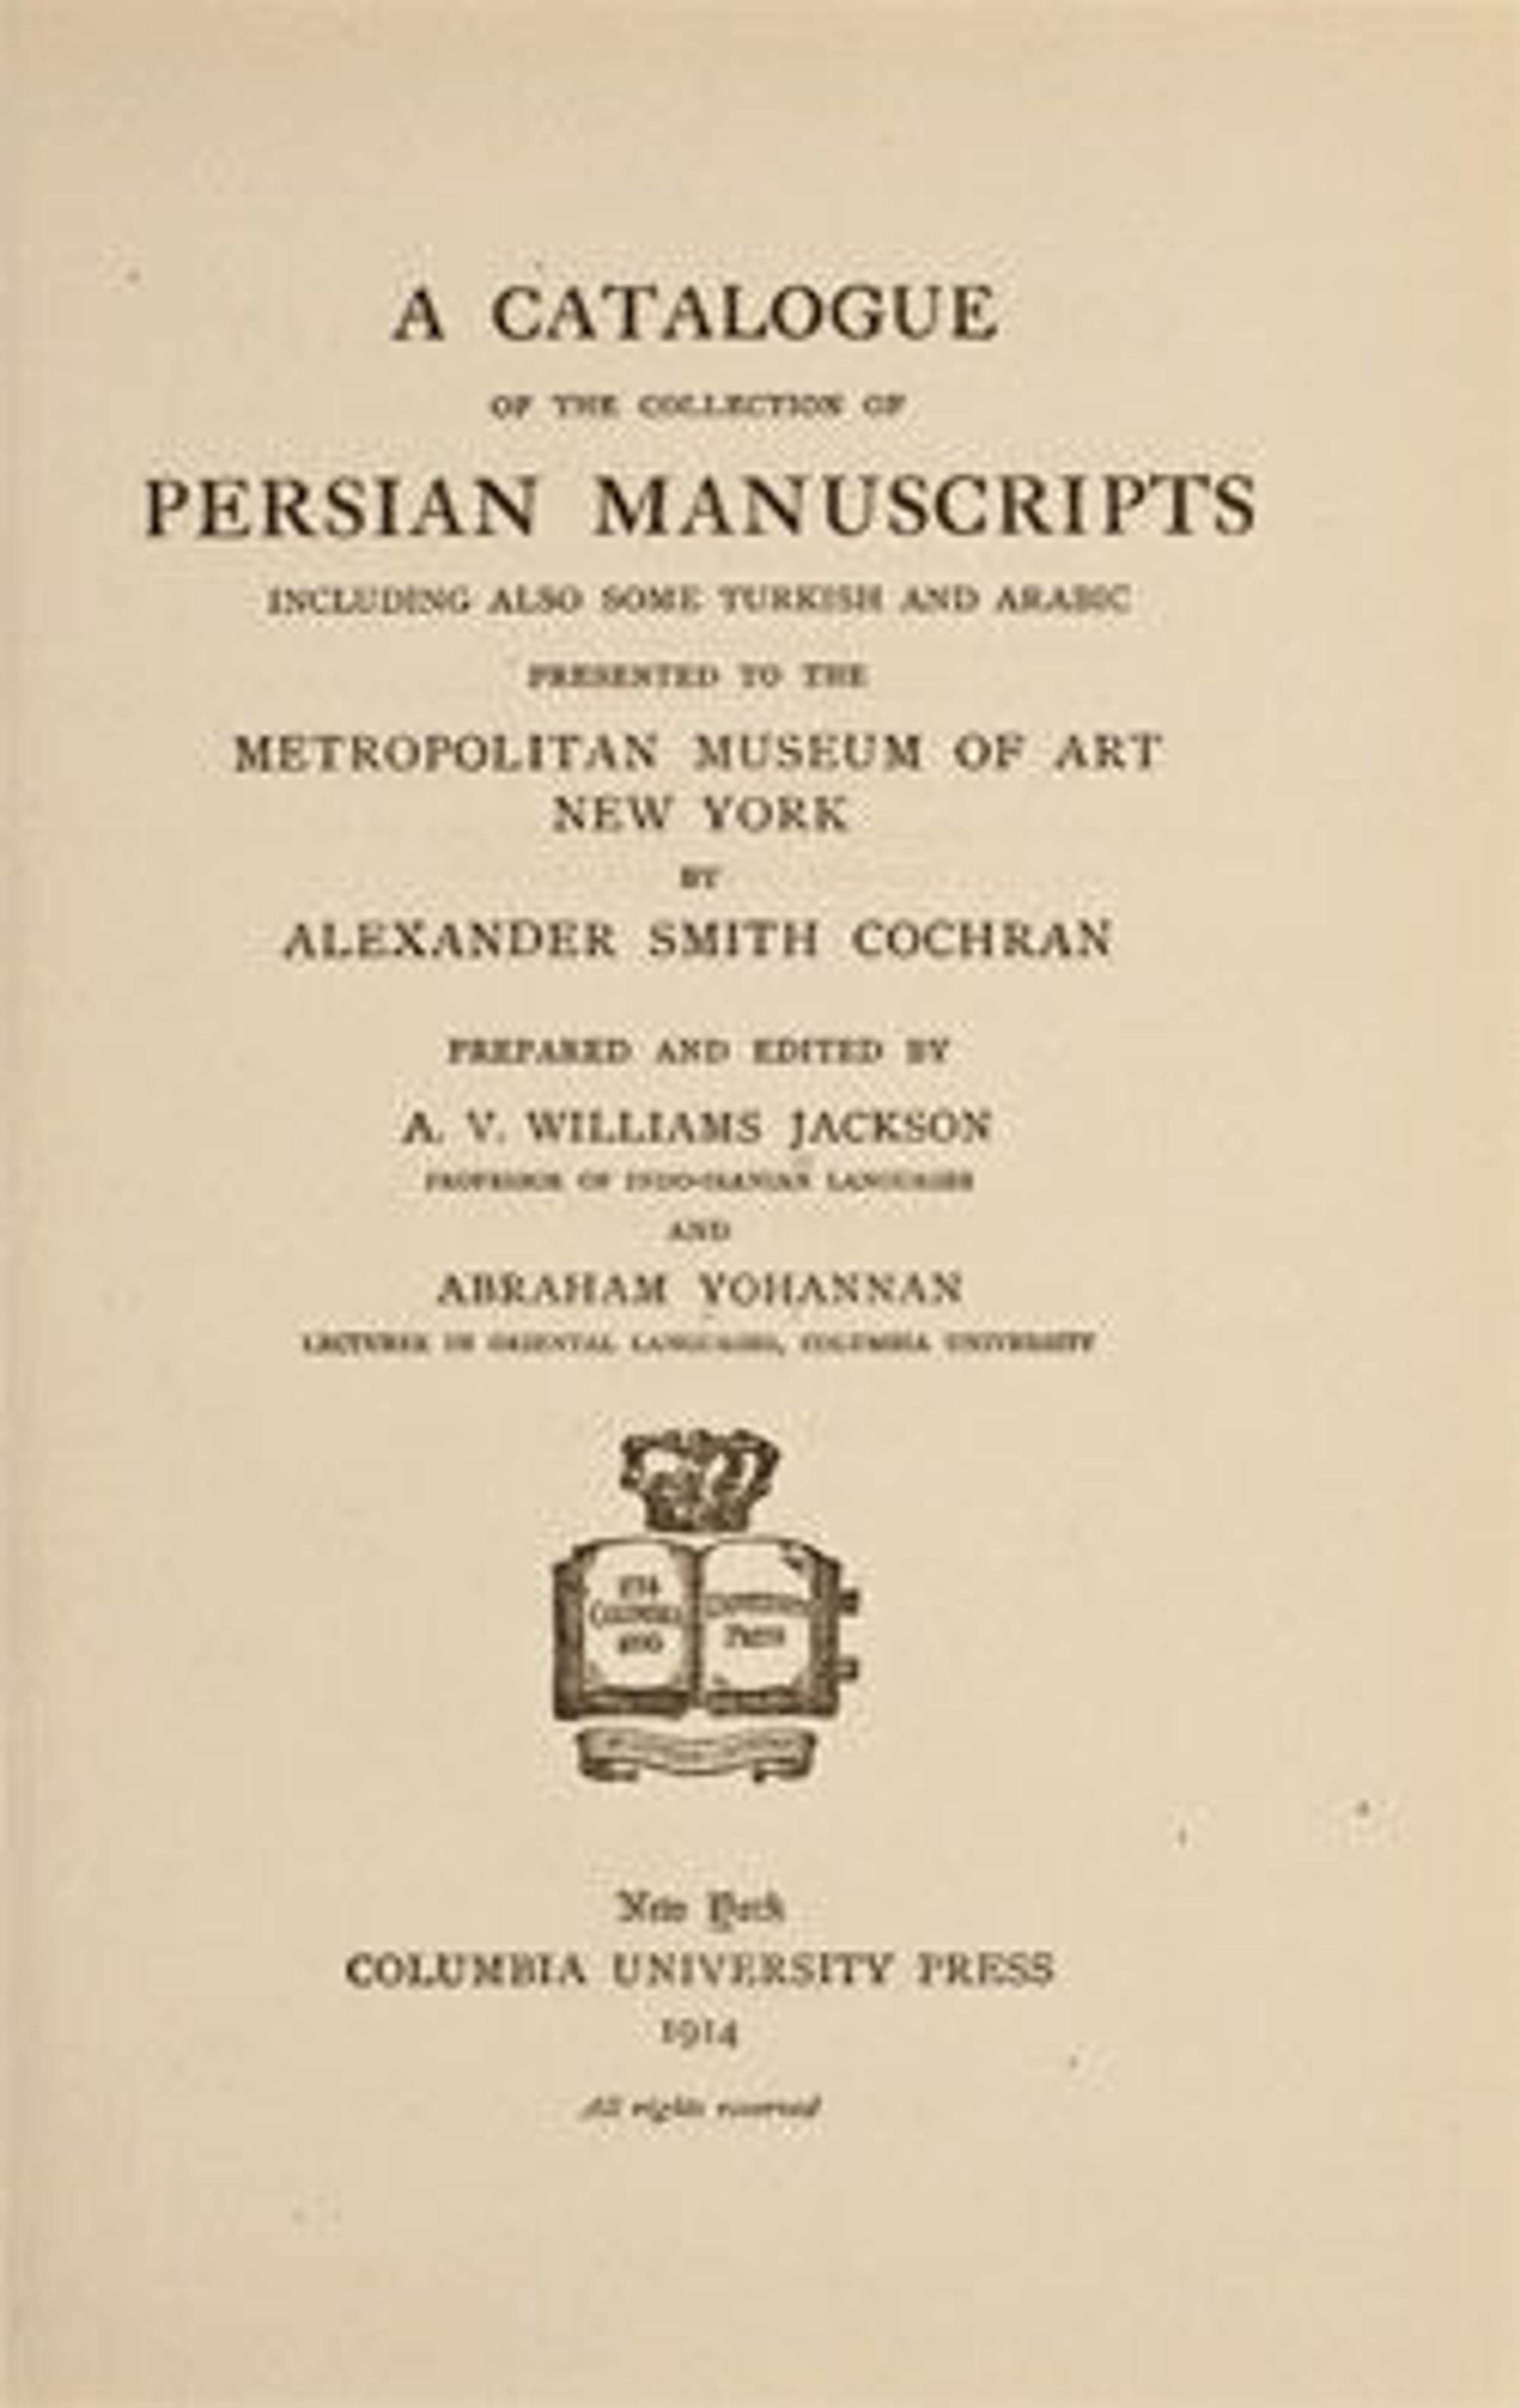 Title Page of A Catalogue of the Collection of Persian Manuscripts Including Also Some Turkish and Arabic Presented to the Metropolitan Museum of Art New York by Alexander Smith Cochran